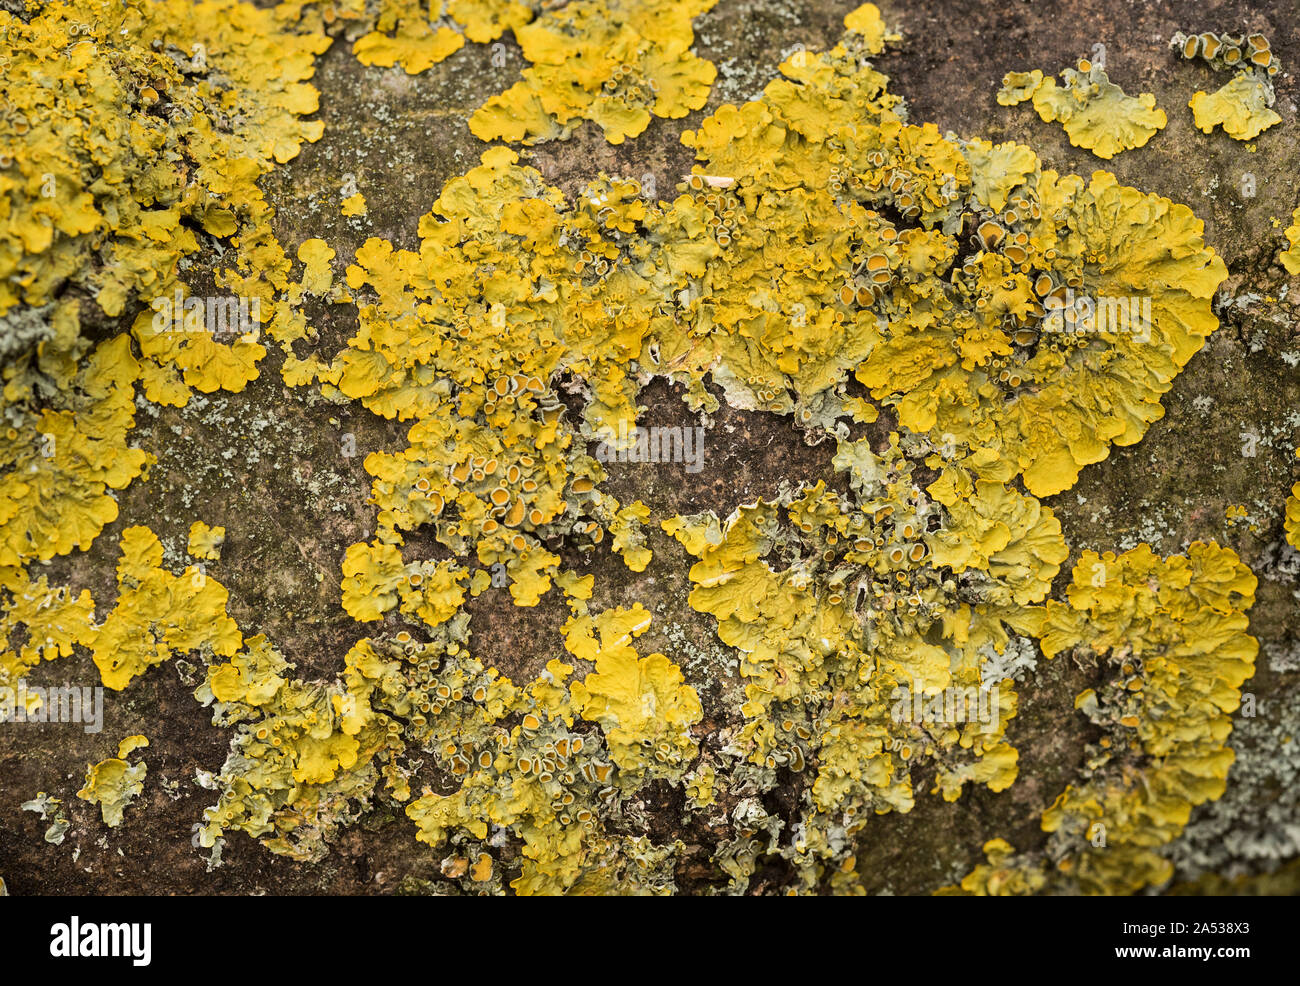 Leafy Xanthoria lichen growing on the bark of an Ash,from the Greek 'xanthos' meaning yellow. Nitrogen loving lichen, indicates Nitrogen pollutants. Stock Photo